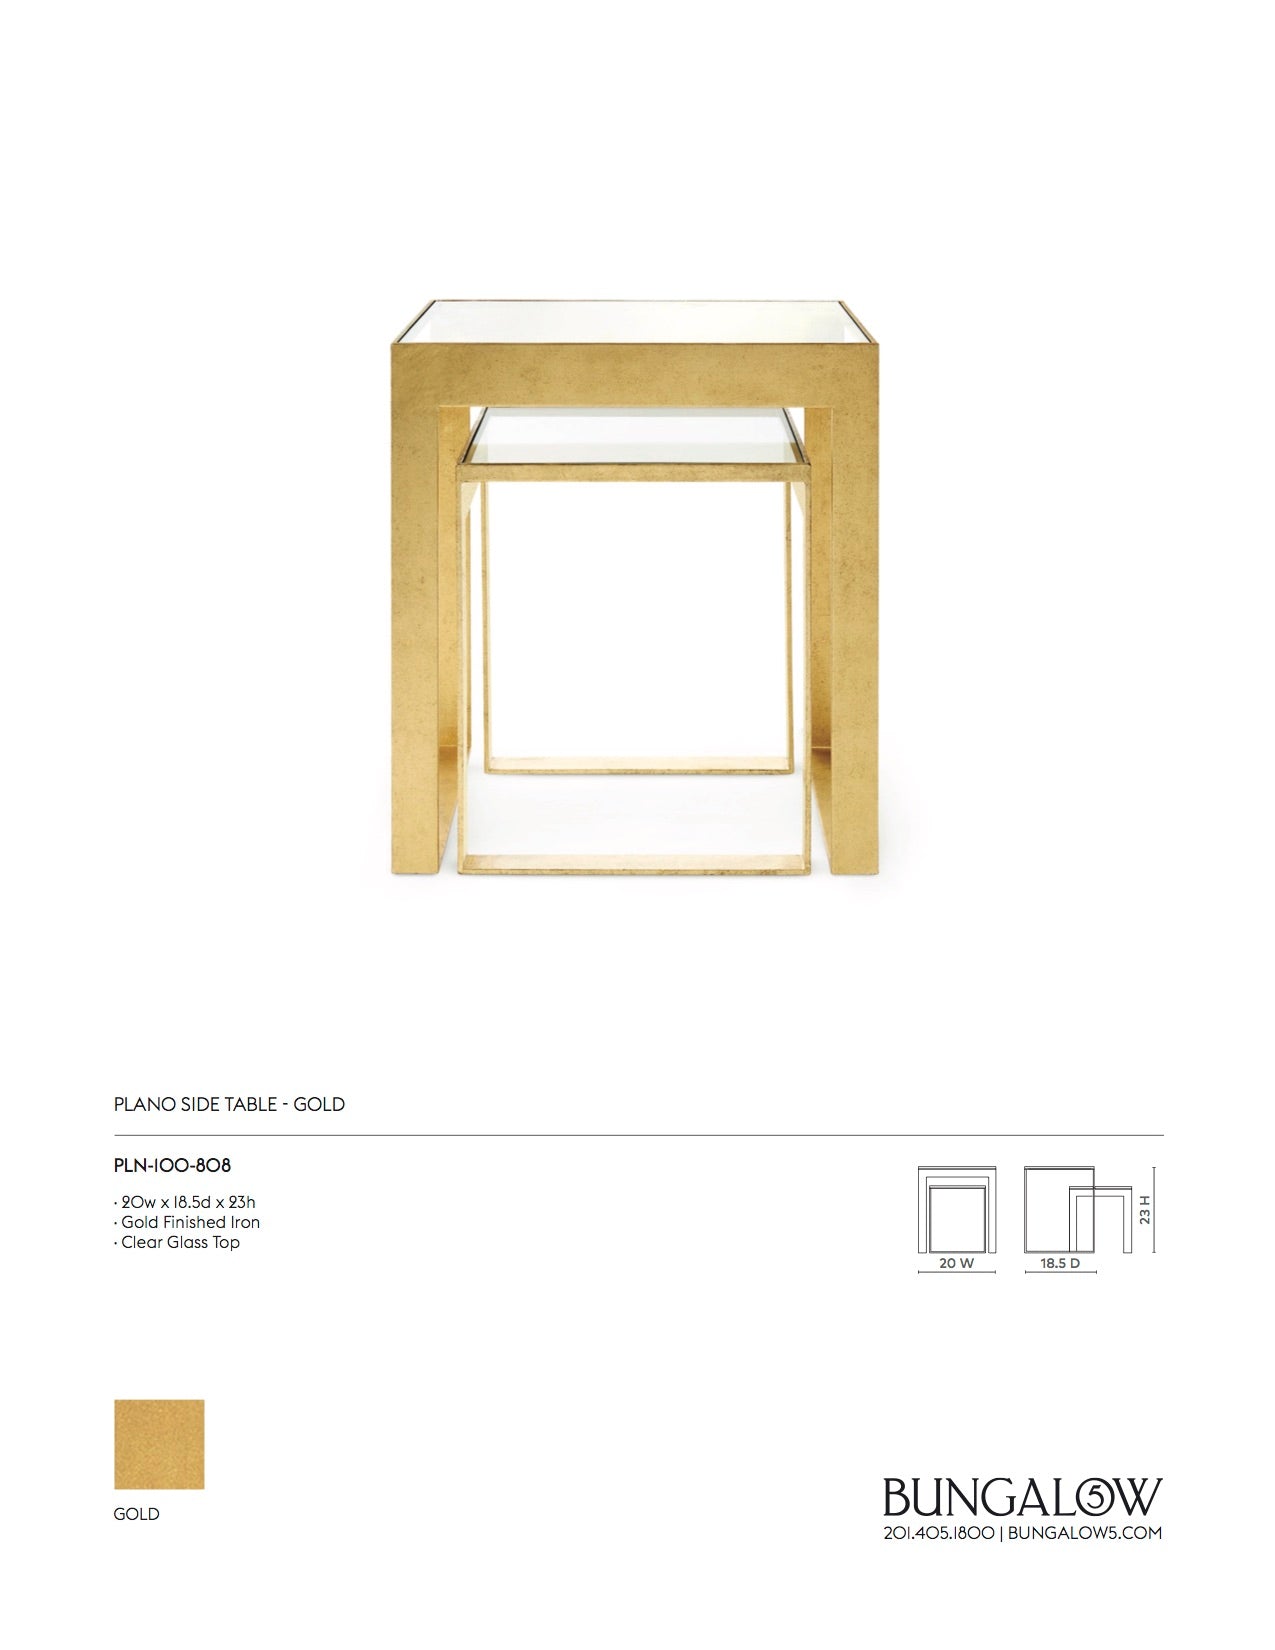 Bungalow 5 Plano Side Table Gold Tearsheet